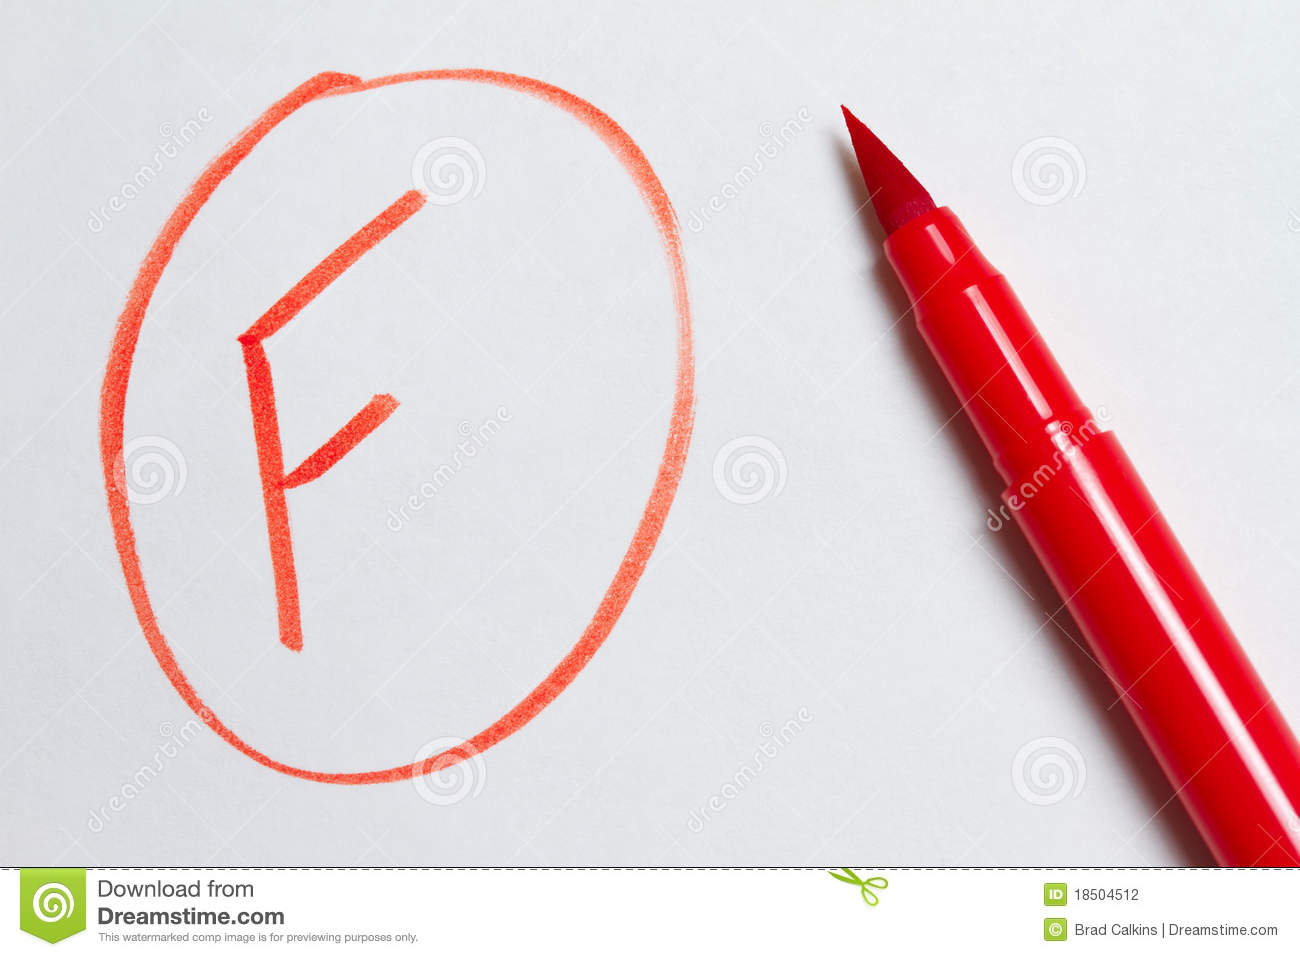 Red Marking Pen And F For Failing Grade On School Paper